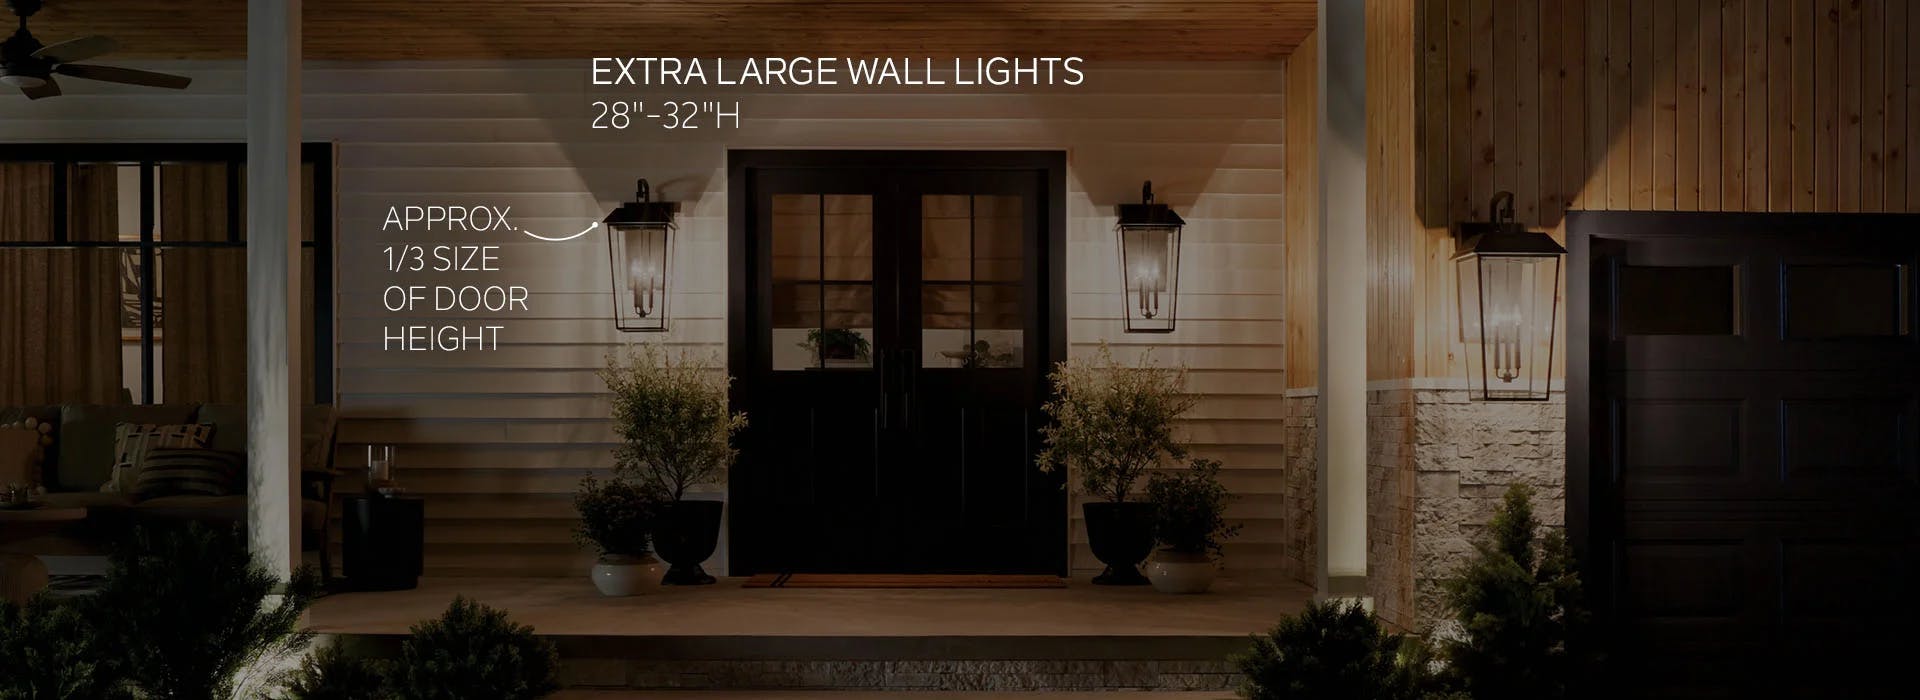 Exterior of a home featuring 3 mathus sconces in black, illustrating "Extra Large Wall Lights" at 28 to 32 inches tall and approximately one third of the heigh of the front door.